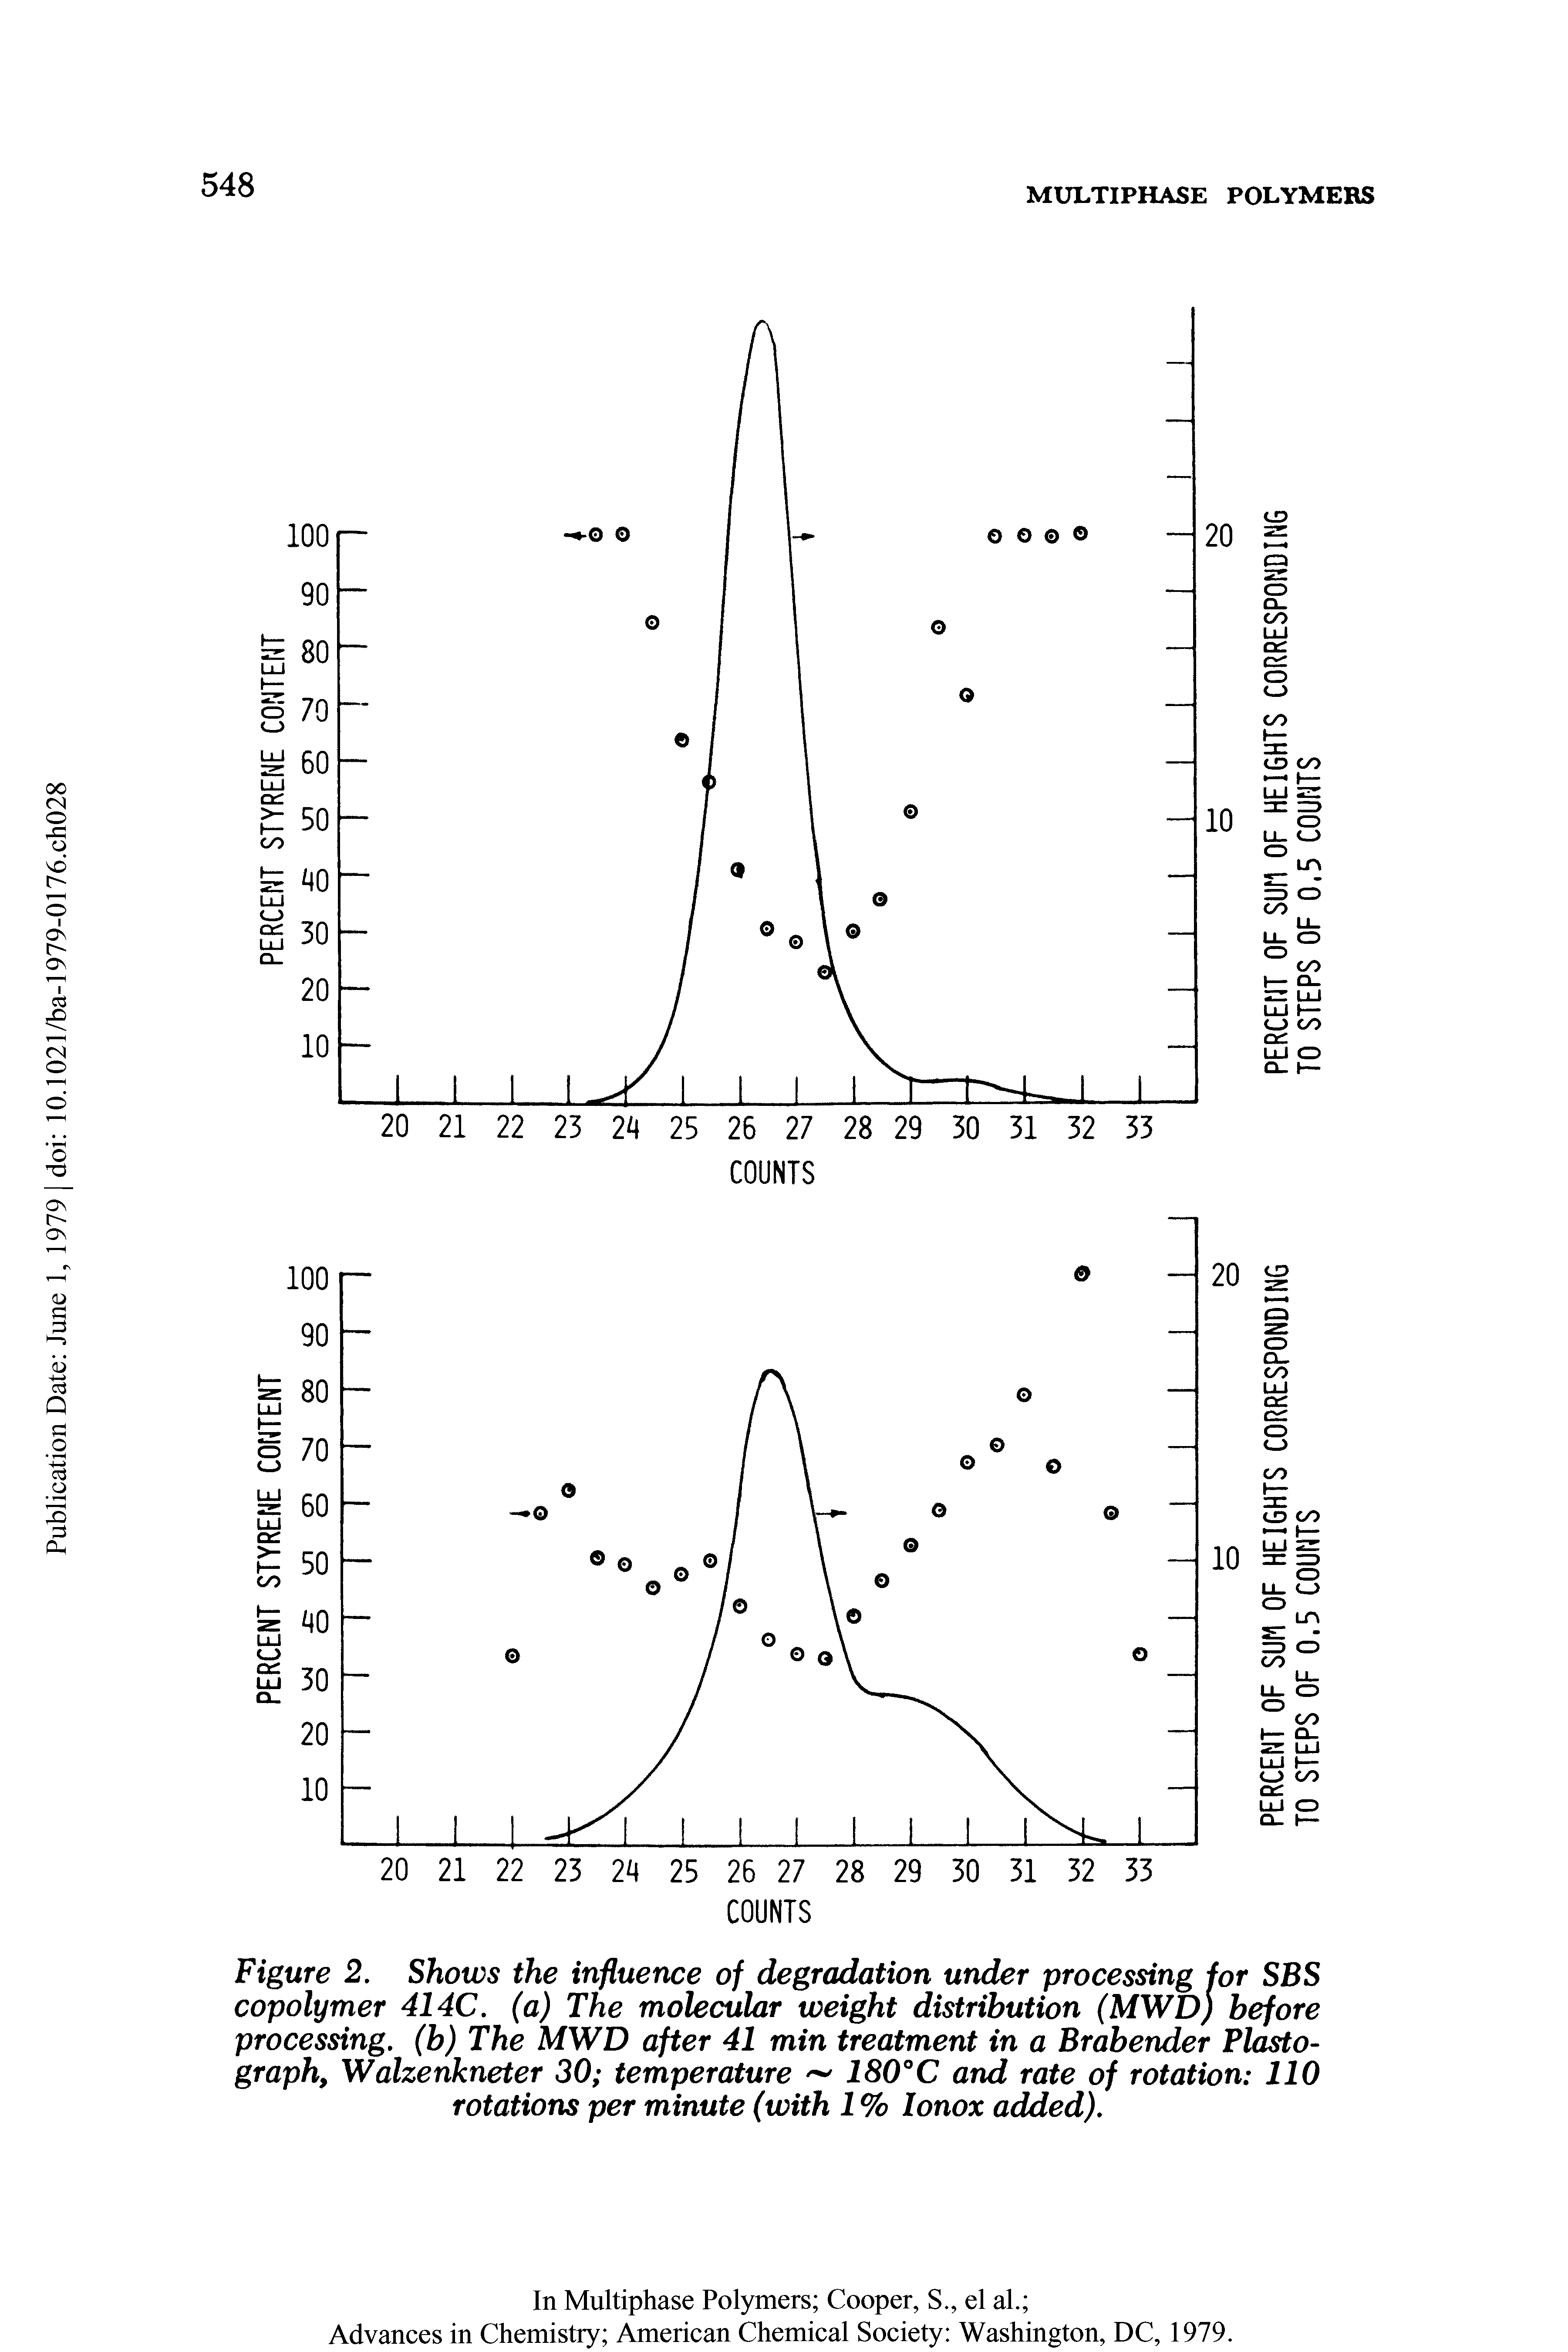 Figure 2. Shows the influence of degradation under processing for SBS copolymer 414C. (a) The molecular weight distribution (MWD) before processing, (b) The MWD after 41 min treatment in a Brabender Plasto-graph, Walzenkneter 30 temperature 180°C and rate of rotation 110 rotations per minute (with 1 % lonox added).